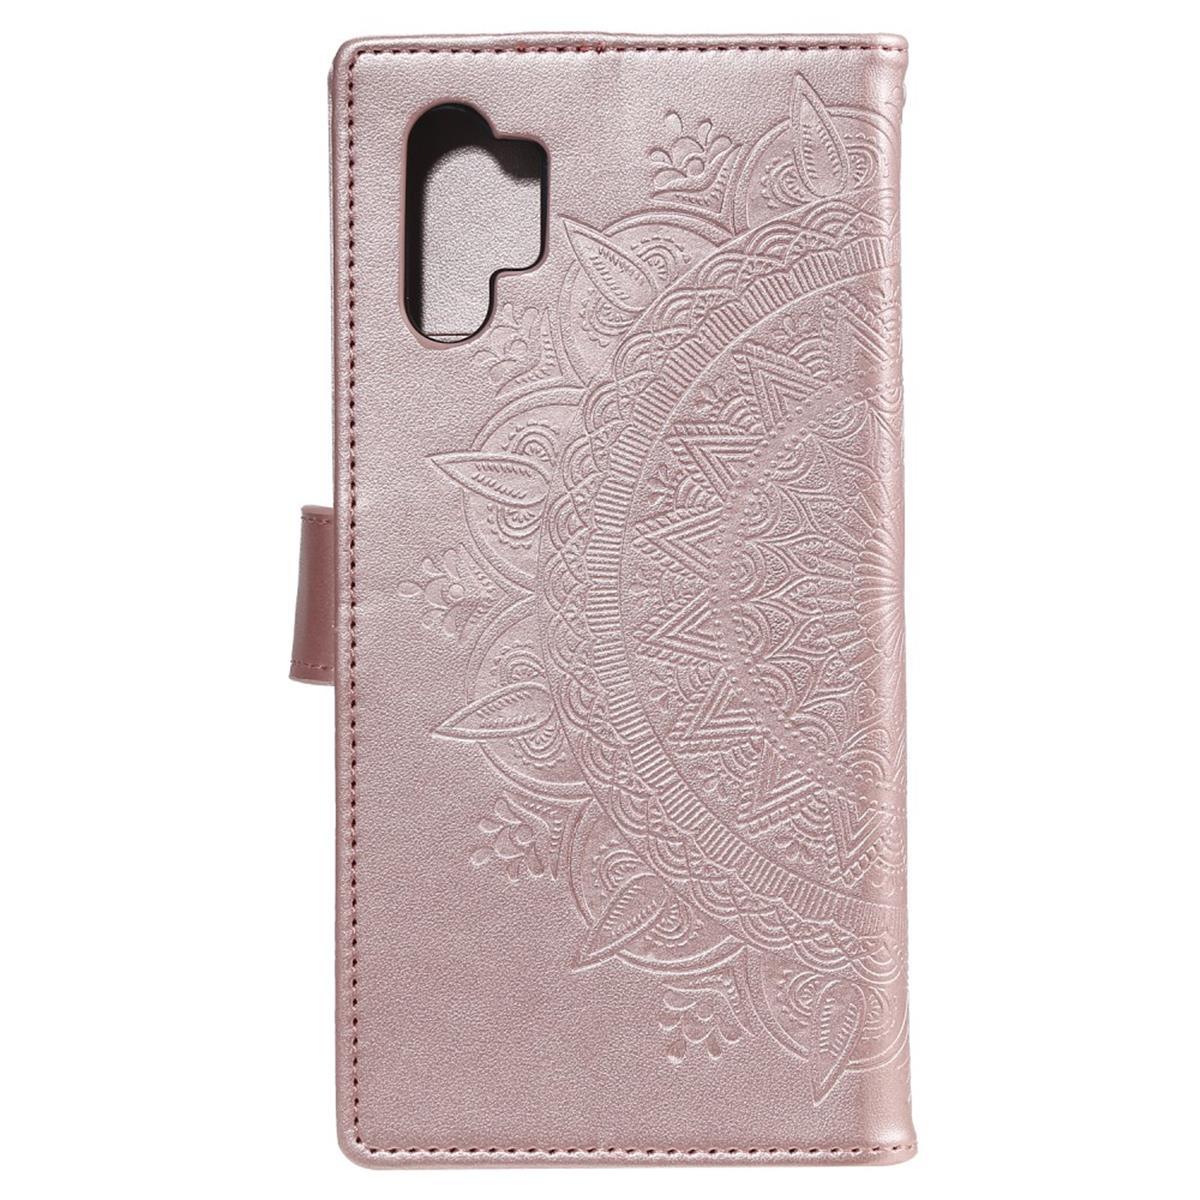 COVERKINGZ Klapphülle mit Mandala Bookcover, 4G, A32 Roségold Muster, Samsung, Galaxy